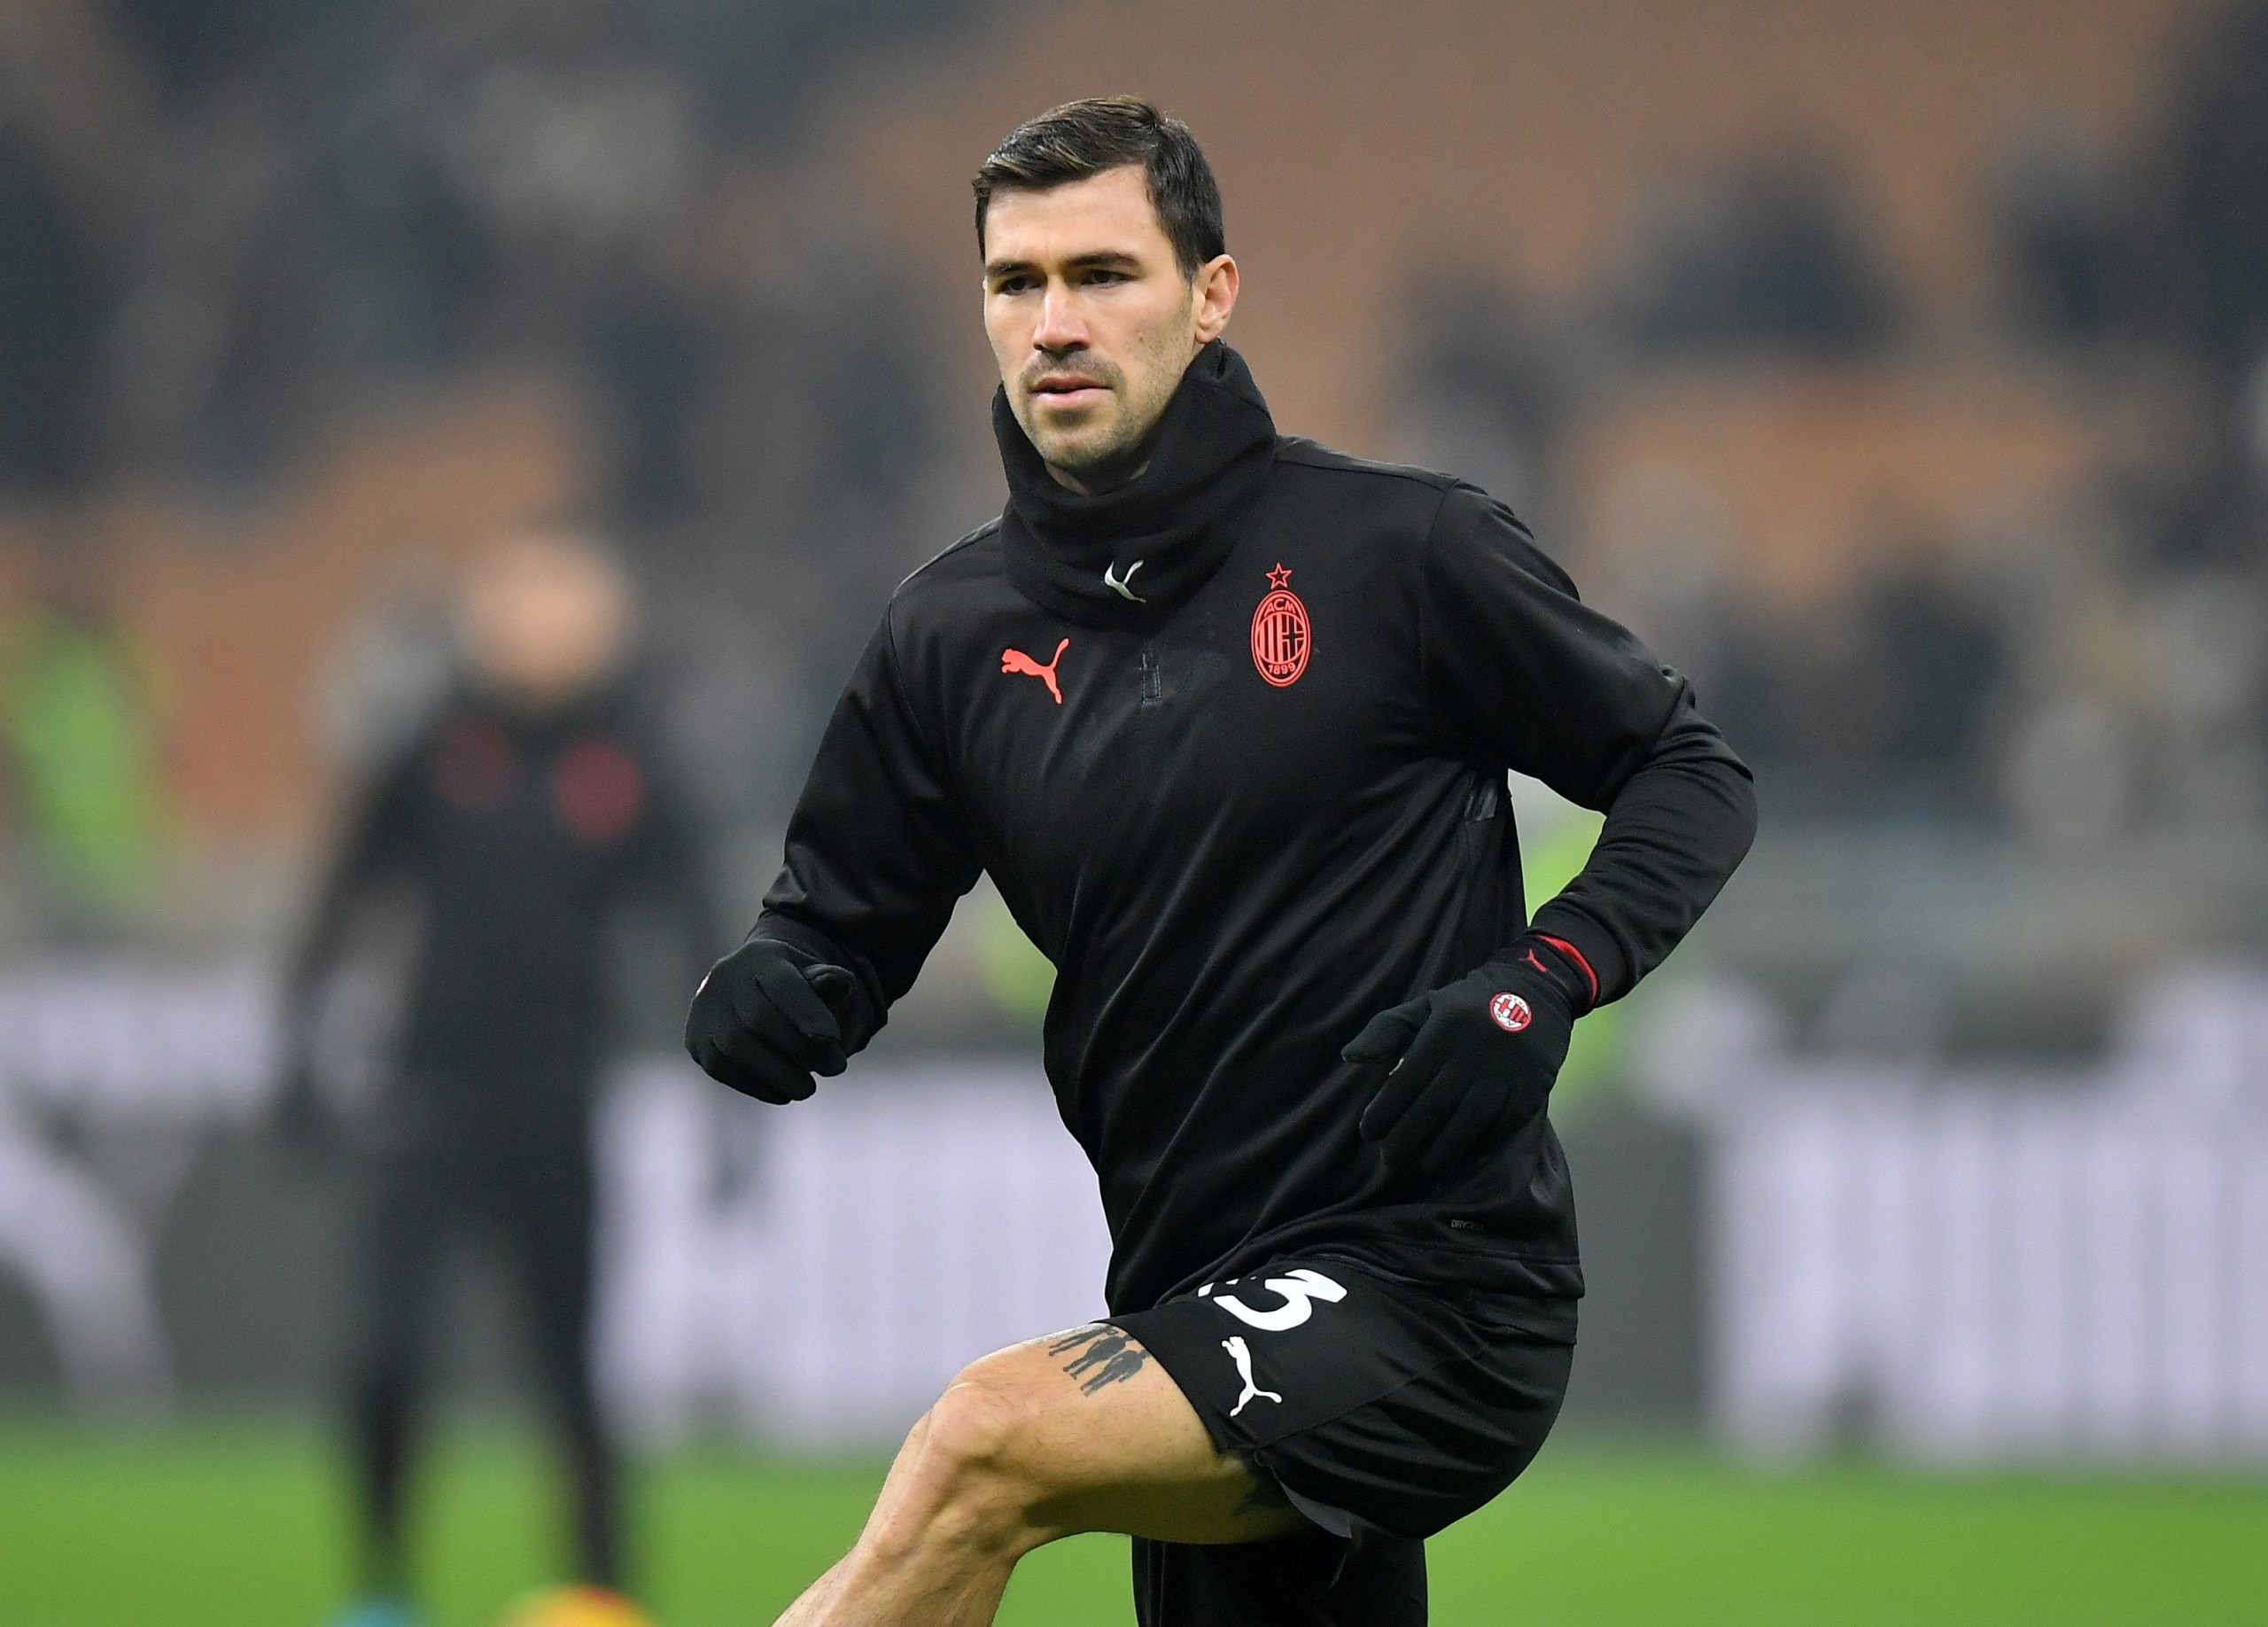 Soccer Football - Serie A - AC Milan v Juventus - San Siro, Milan, Italy - January 23, 2022 AC Milan's Alessio Romagnoli during the warm up before the match REUTERS/Daniele Mascolo